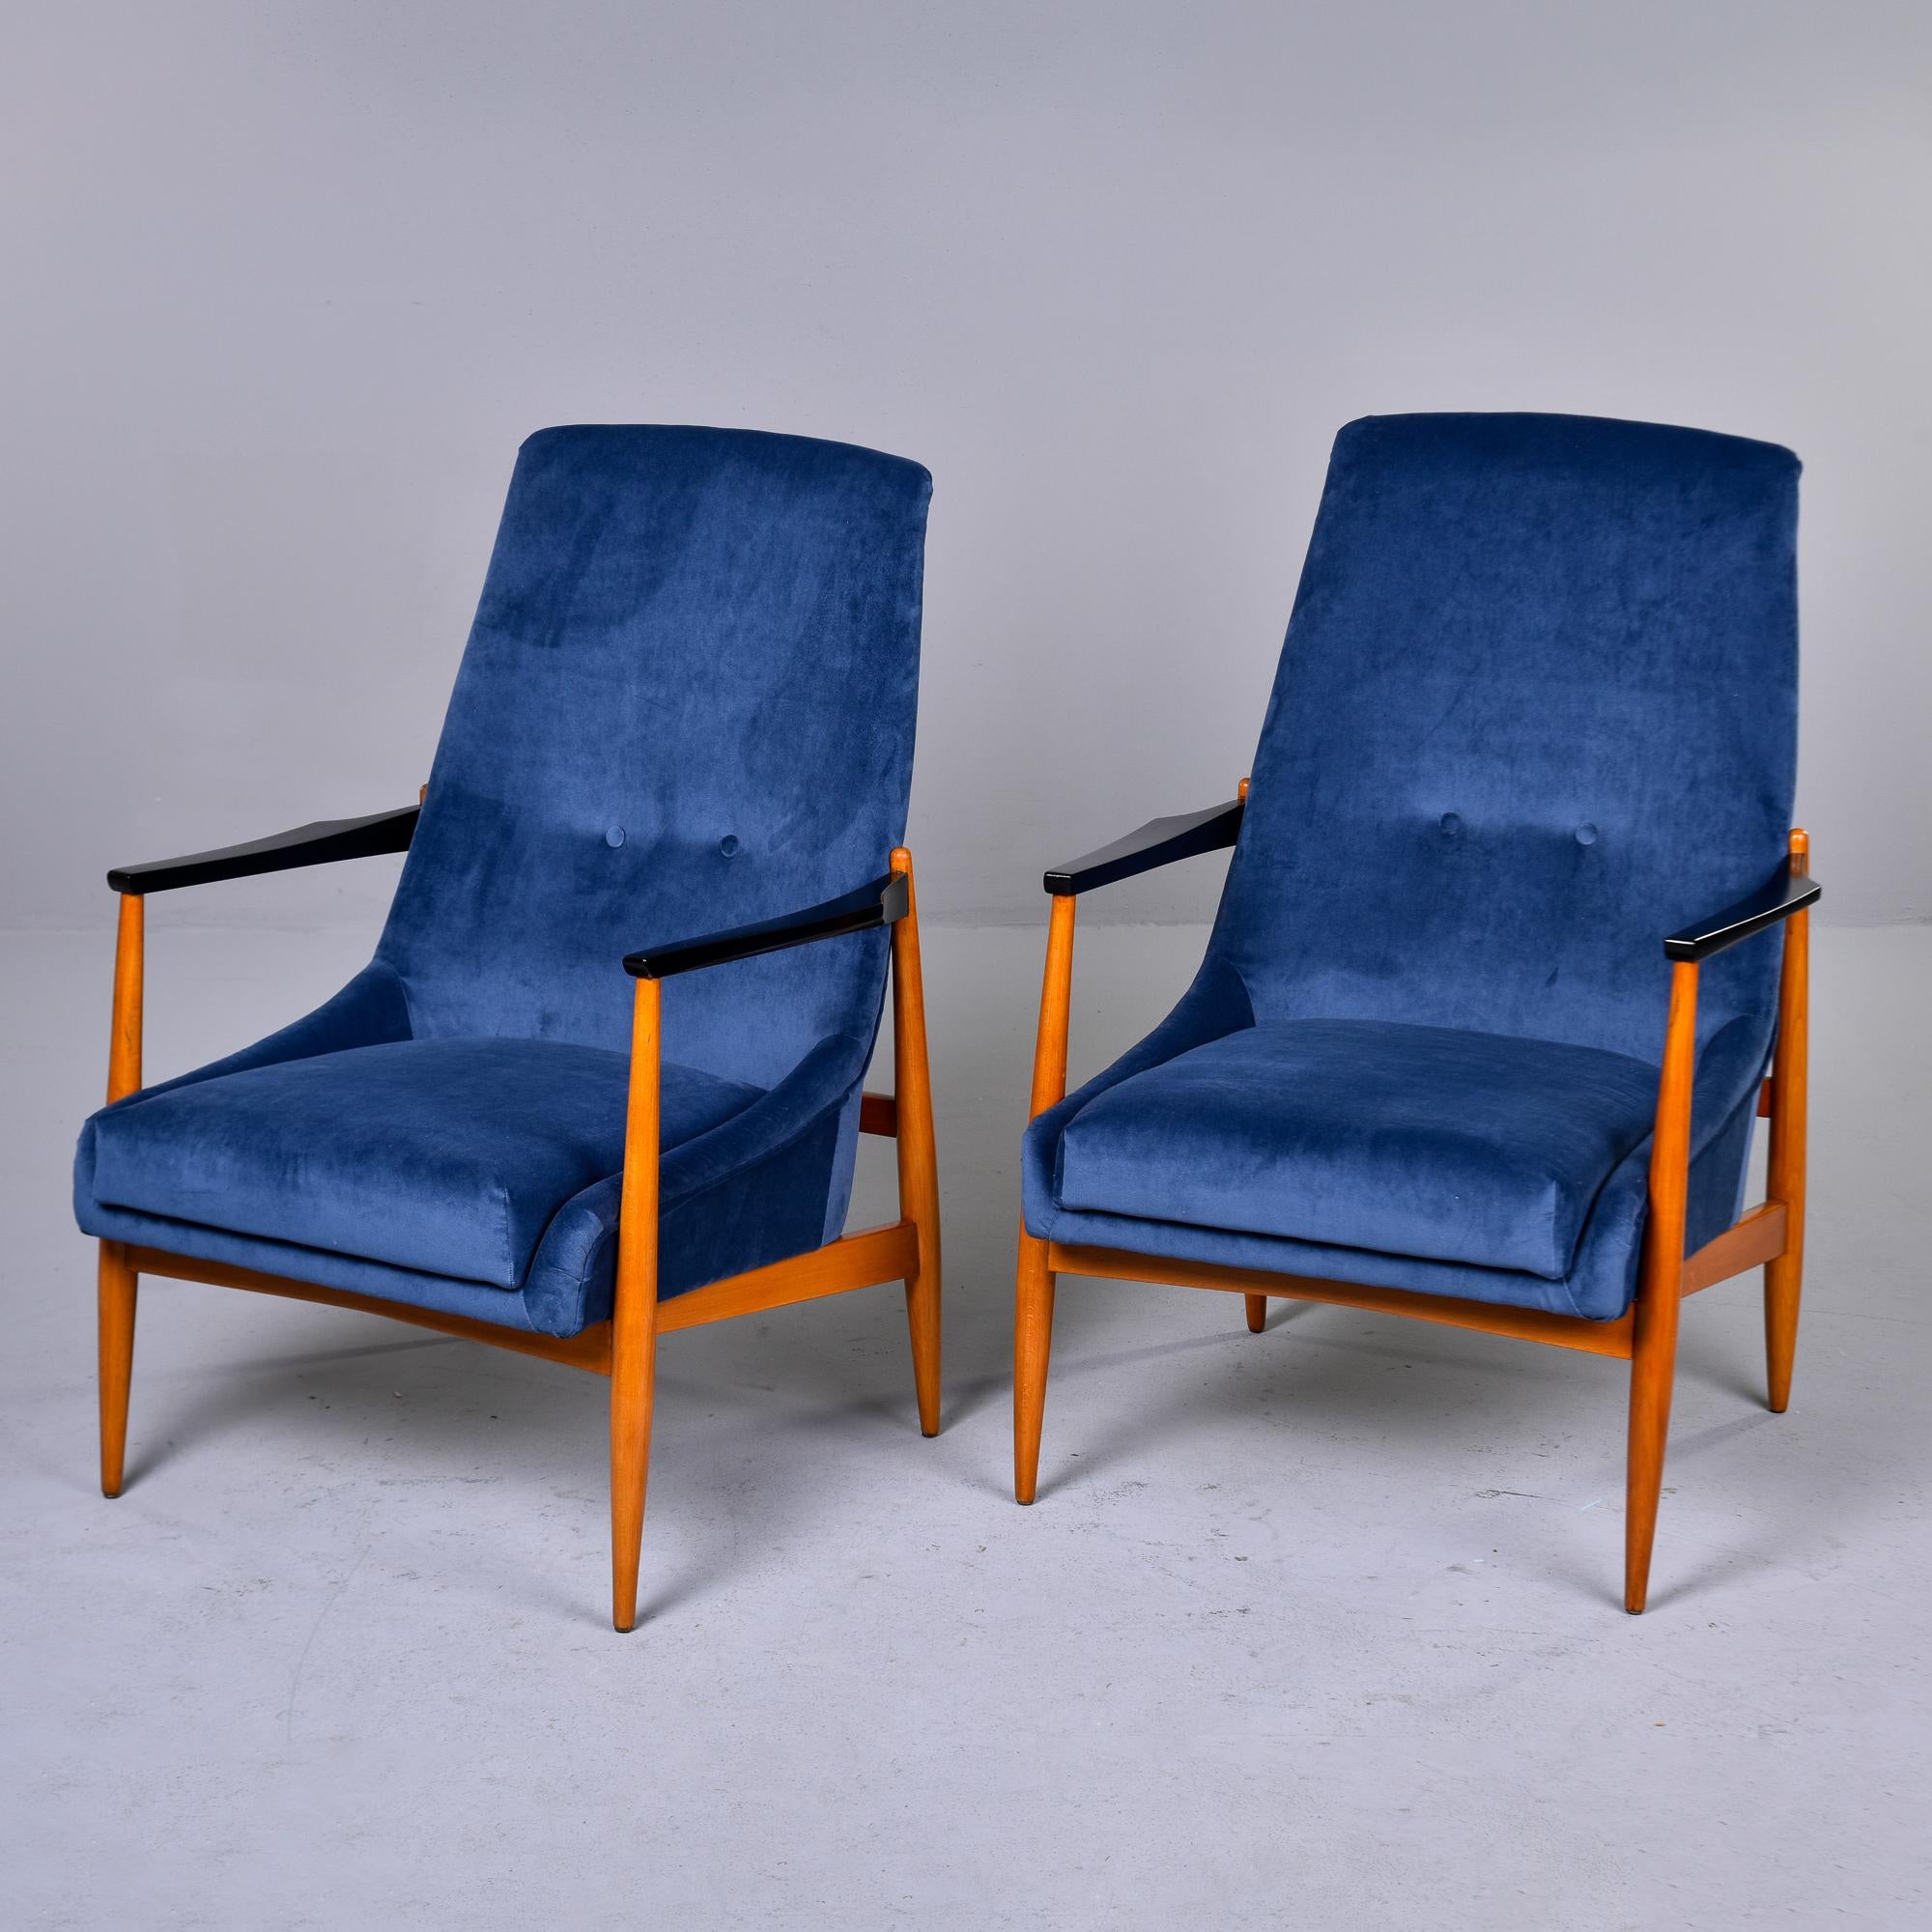 Found in Italy, this pair of circa 1960s lounge chairs feature slender teak frames with contrasting black arms. Seats are a modified scoop-form with two buttons on each tall seat back. The dealer we acquired the chairs from had them reupholstered in